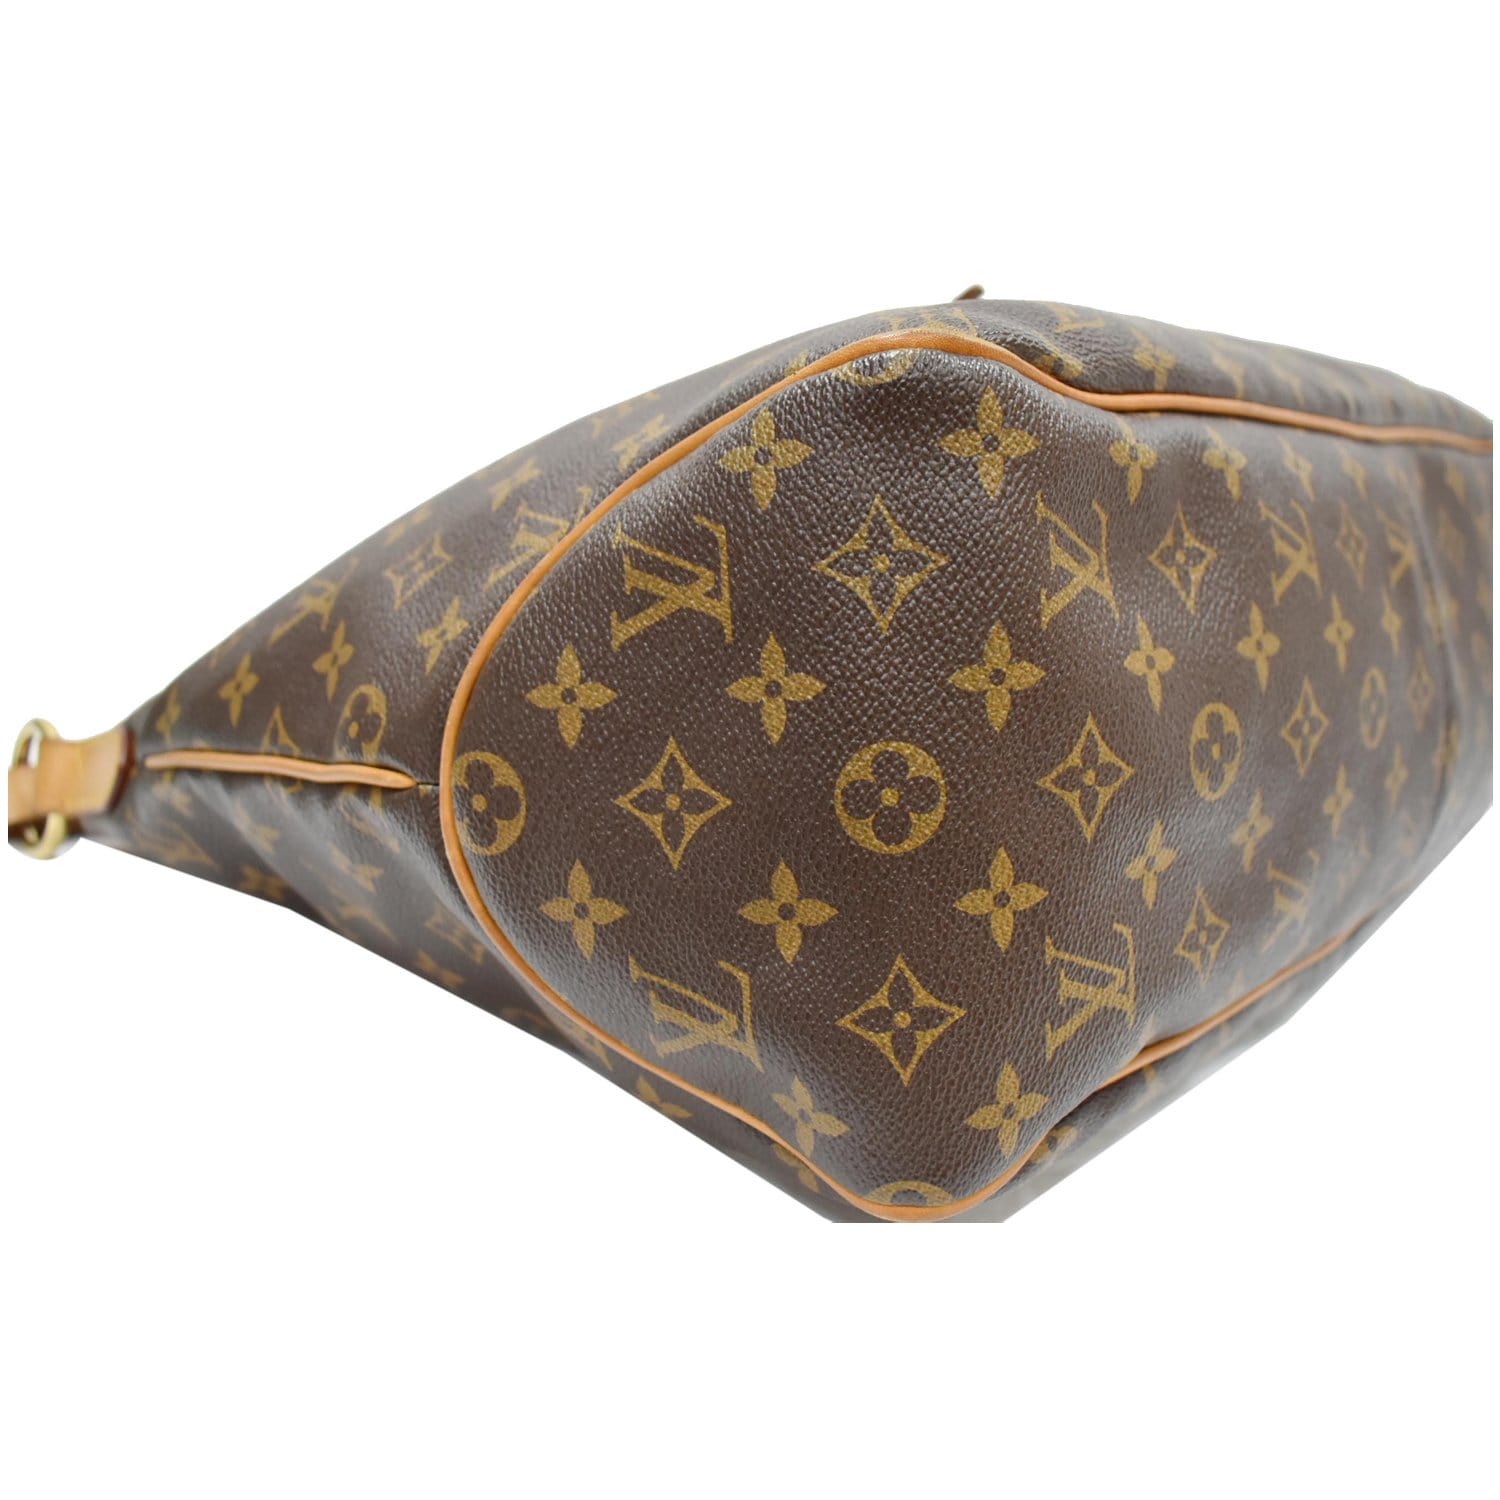 louis vuitton bag for sell